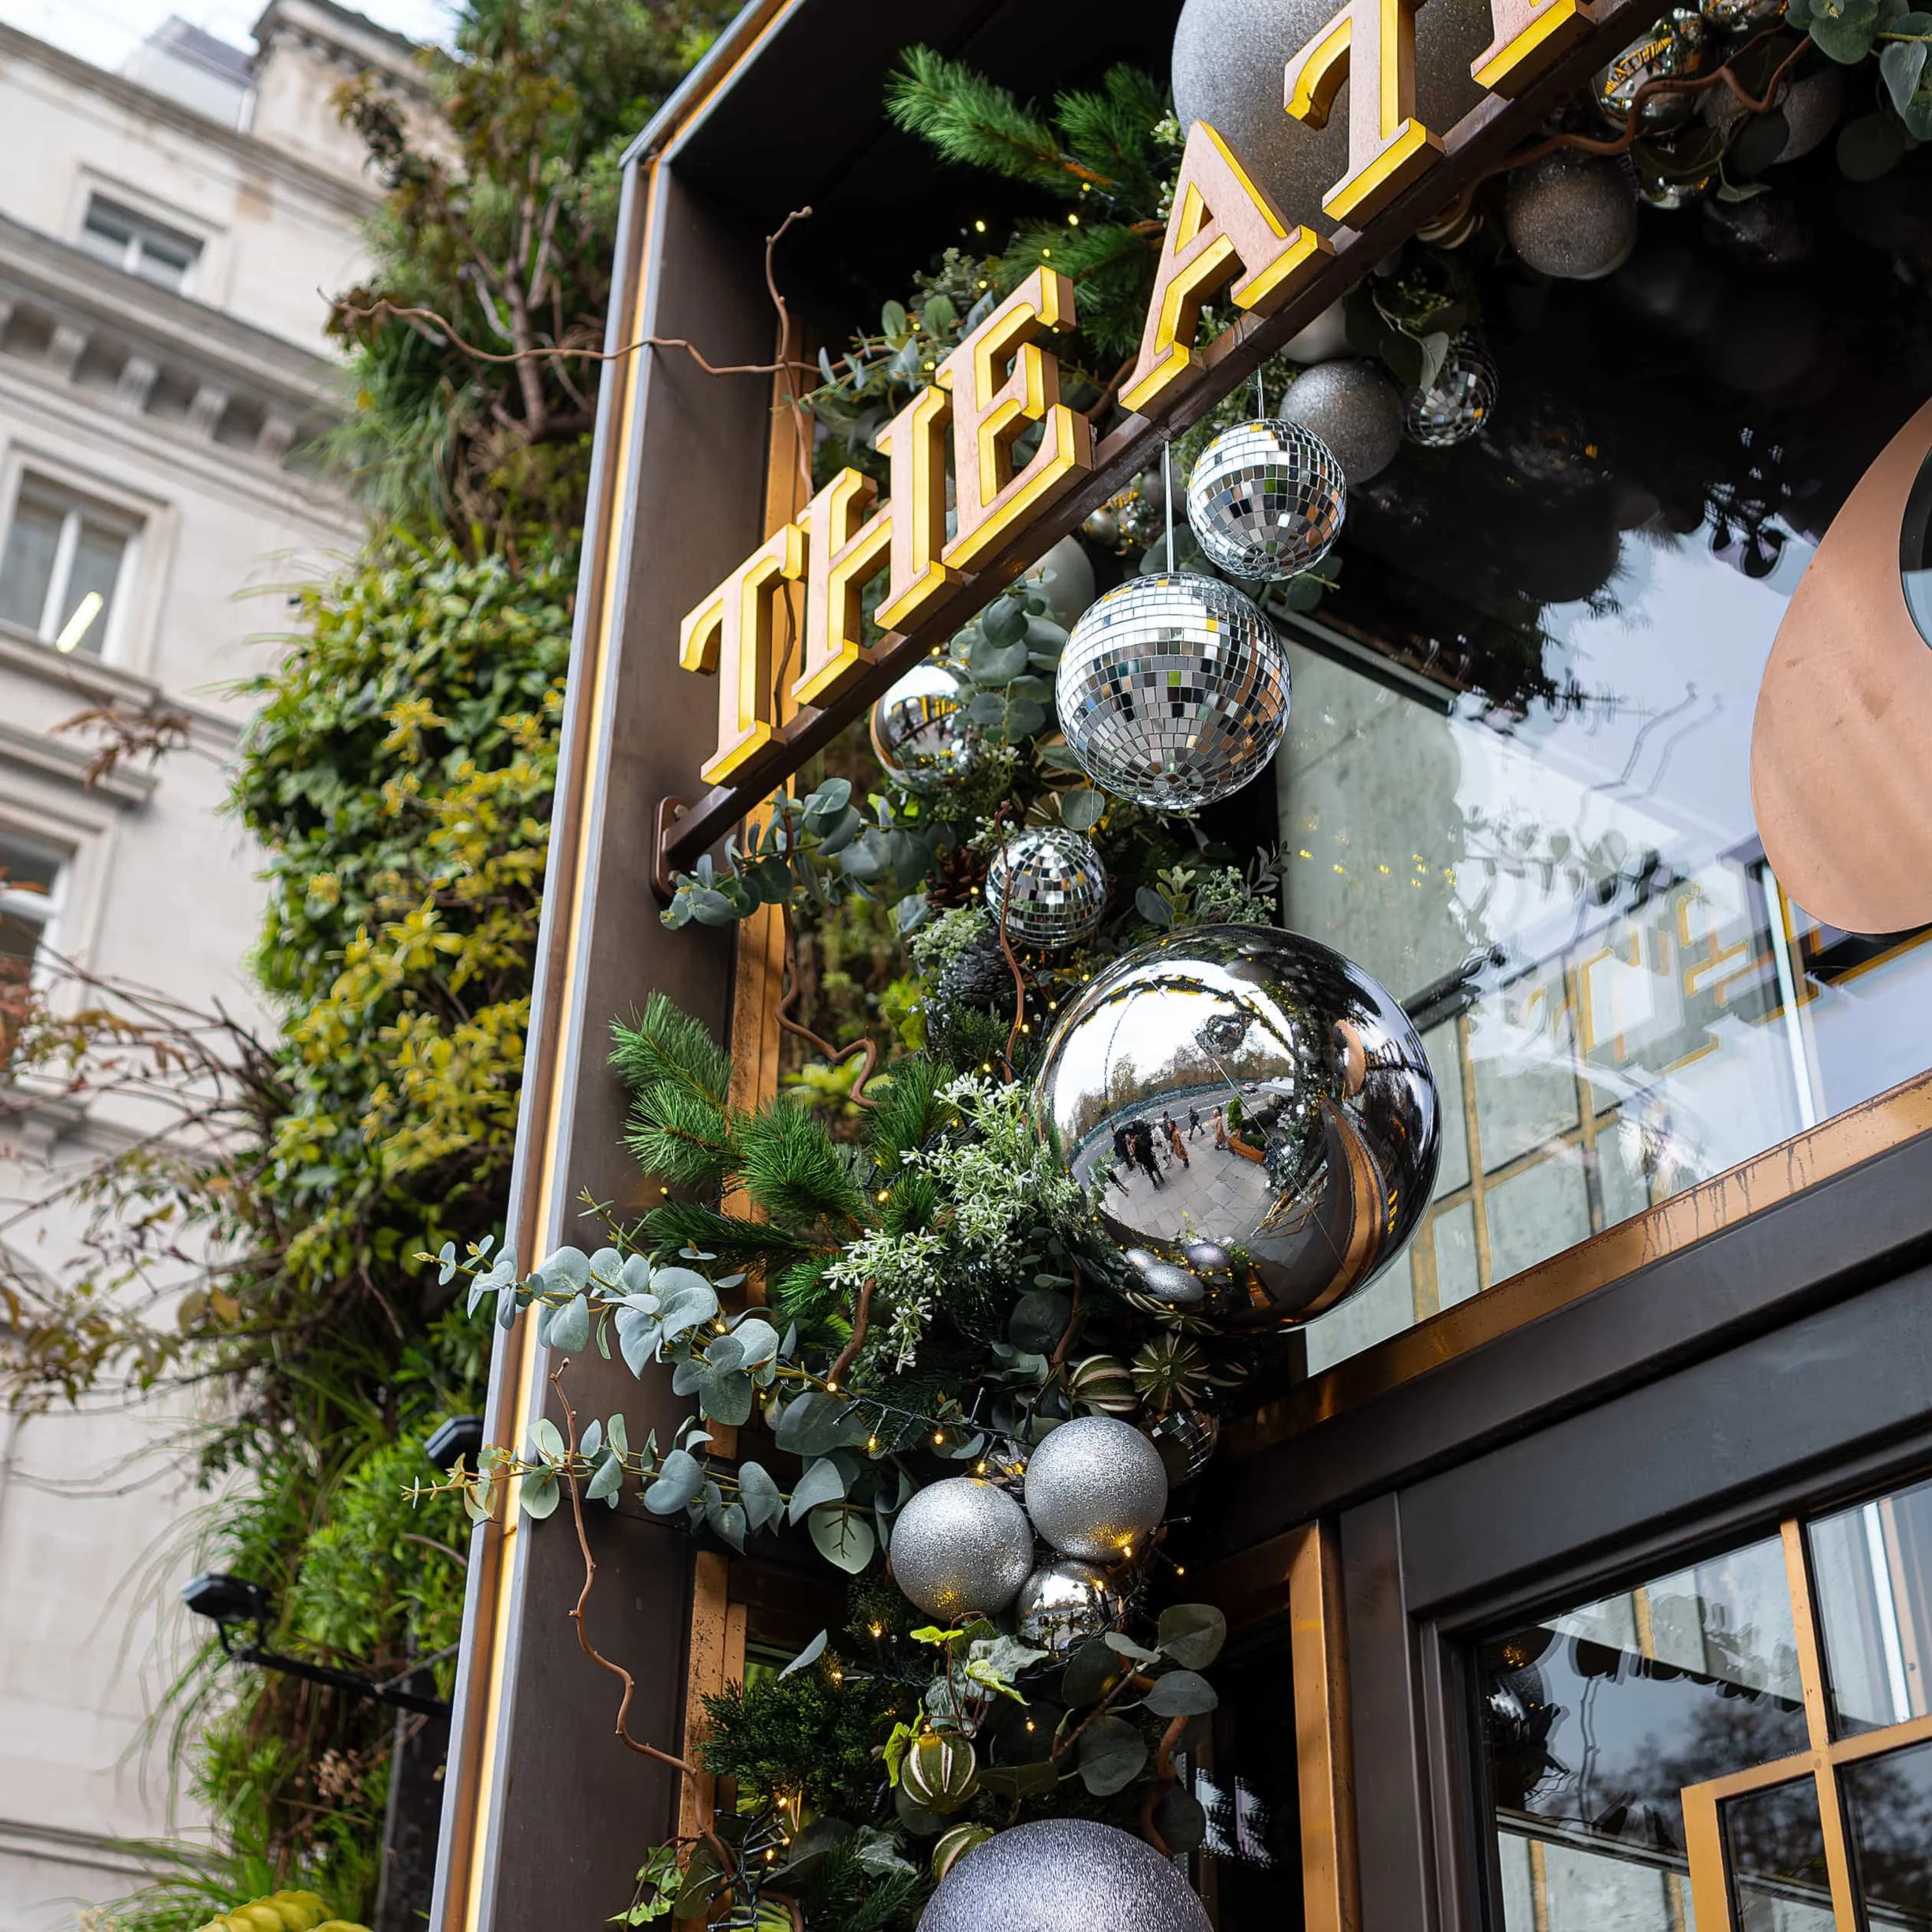 The exterior of 'The Athenaeum' hotel is festively adorned by a bespoke floral arrangement designed, produced and installed by Amaranté London. A custom-designed floral installation, featuring a luxurious mix of pine greenery, eucalyptus, and shimmering silver and mirrored disco ball ornaments, which tastefully embellish the golden signage, inviting guests into a world of festive luxury.